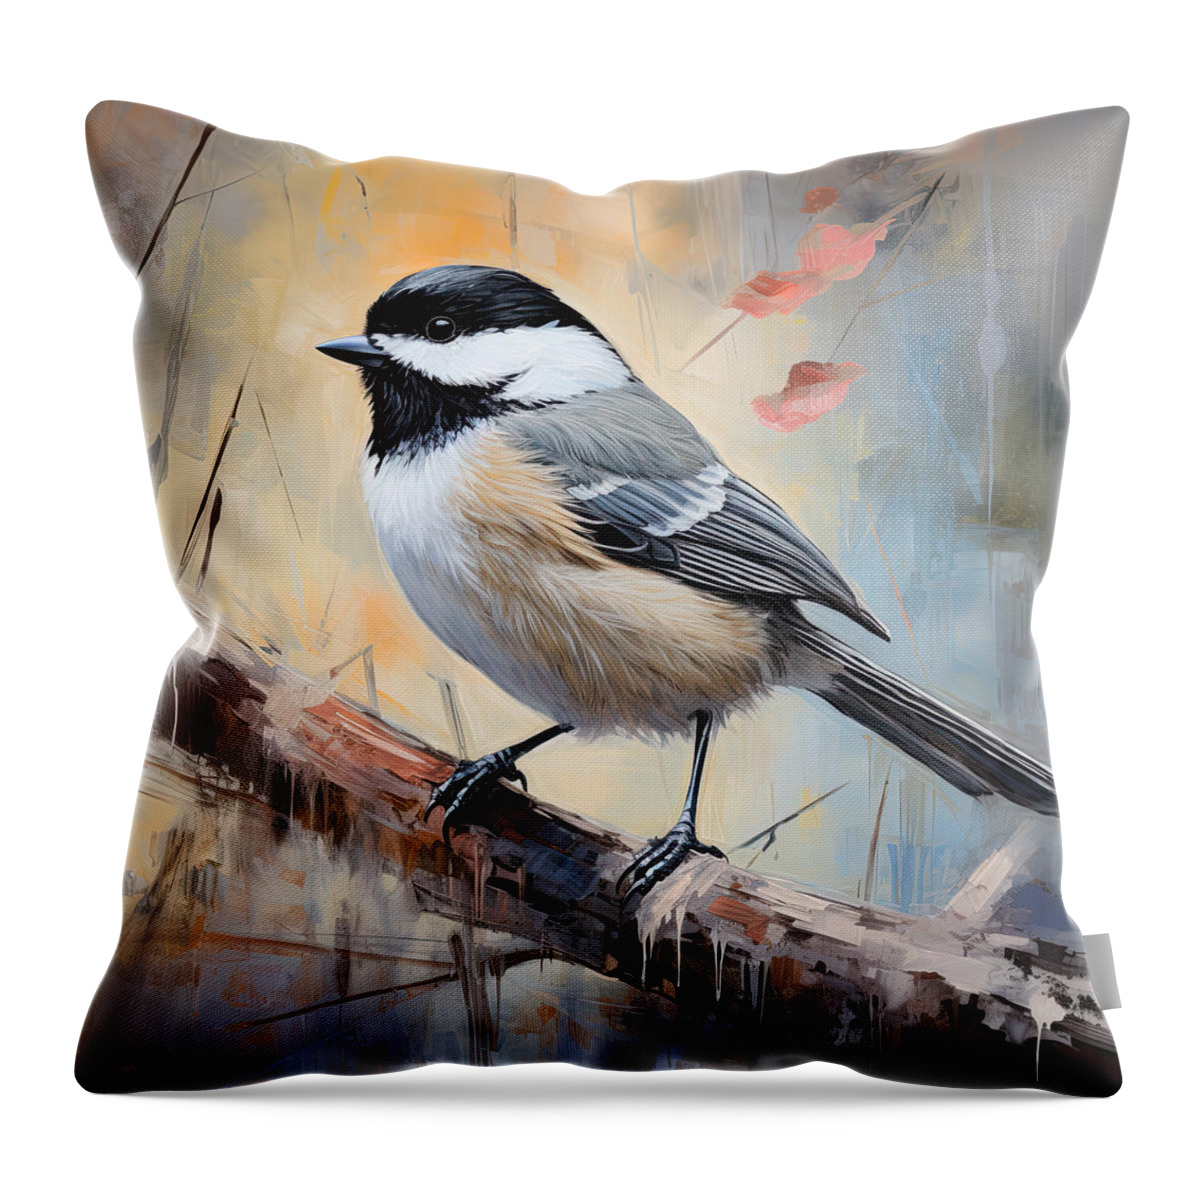 Gray Art Throw Pillow featuring the painting Chickadee Painting by Lourry Legarde